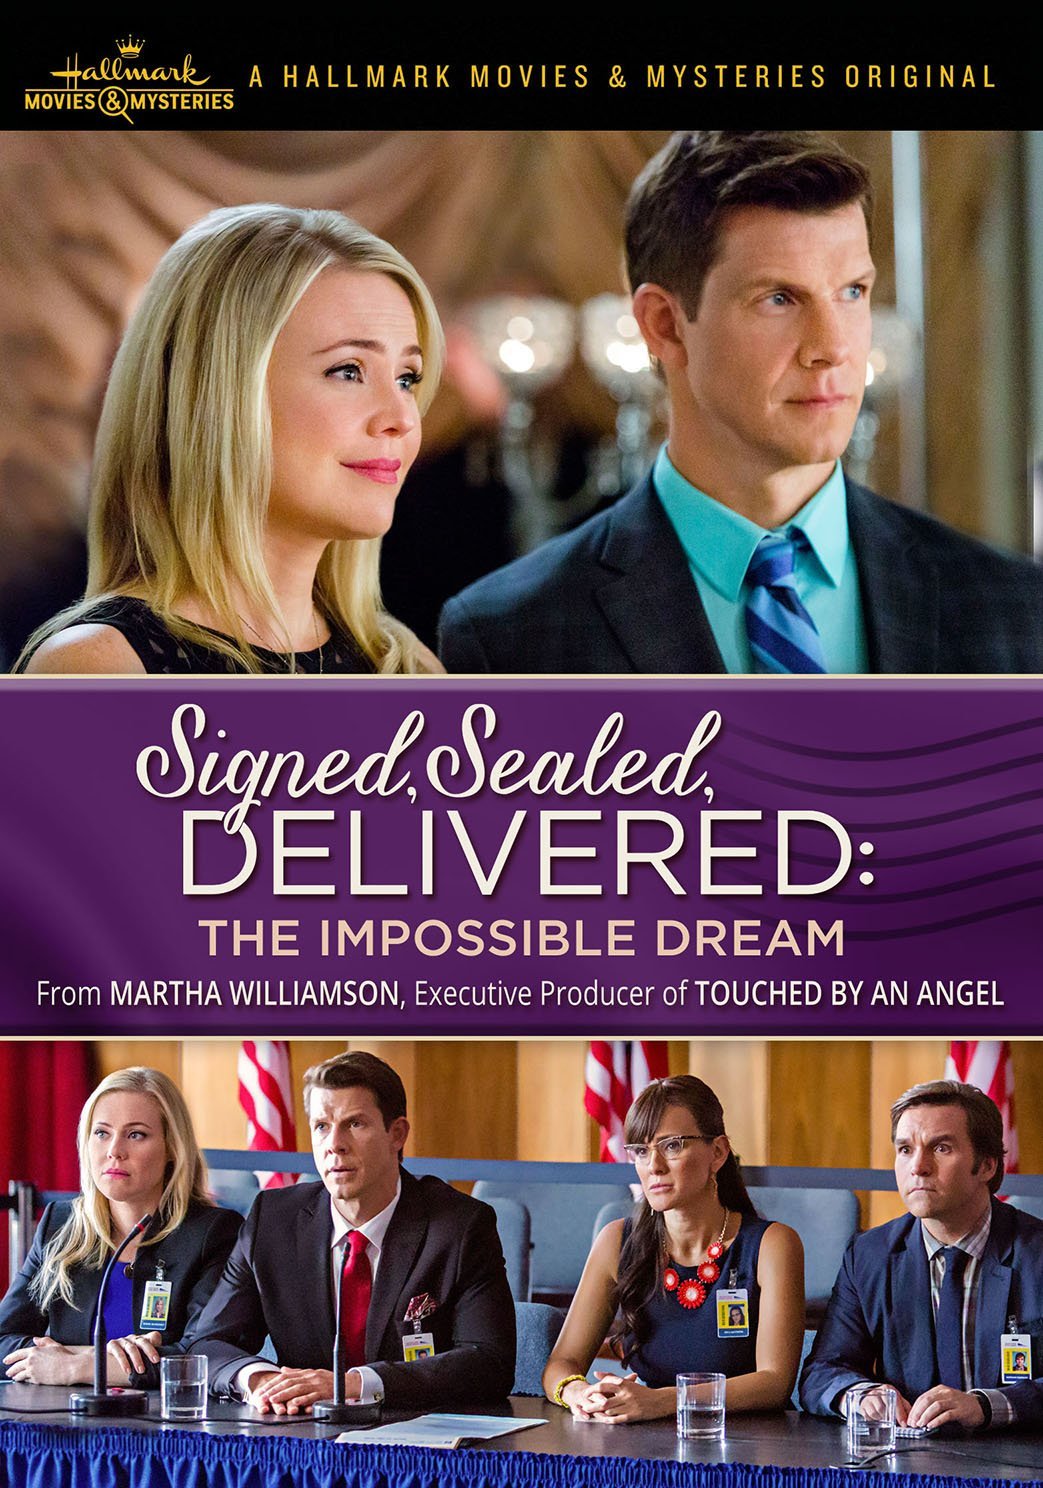 Signed, Sealed, Delivered: The Impossible Dream DVD cover art